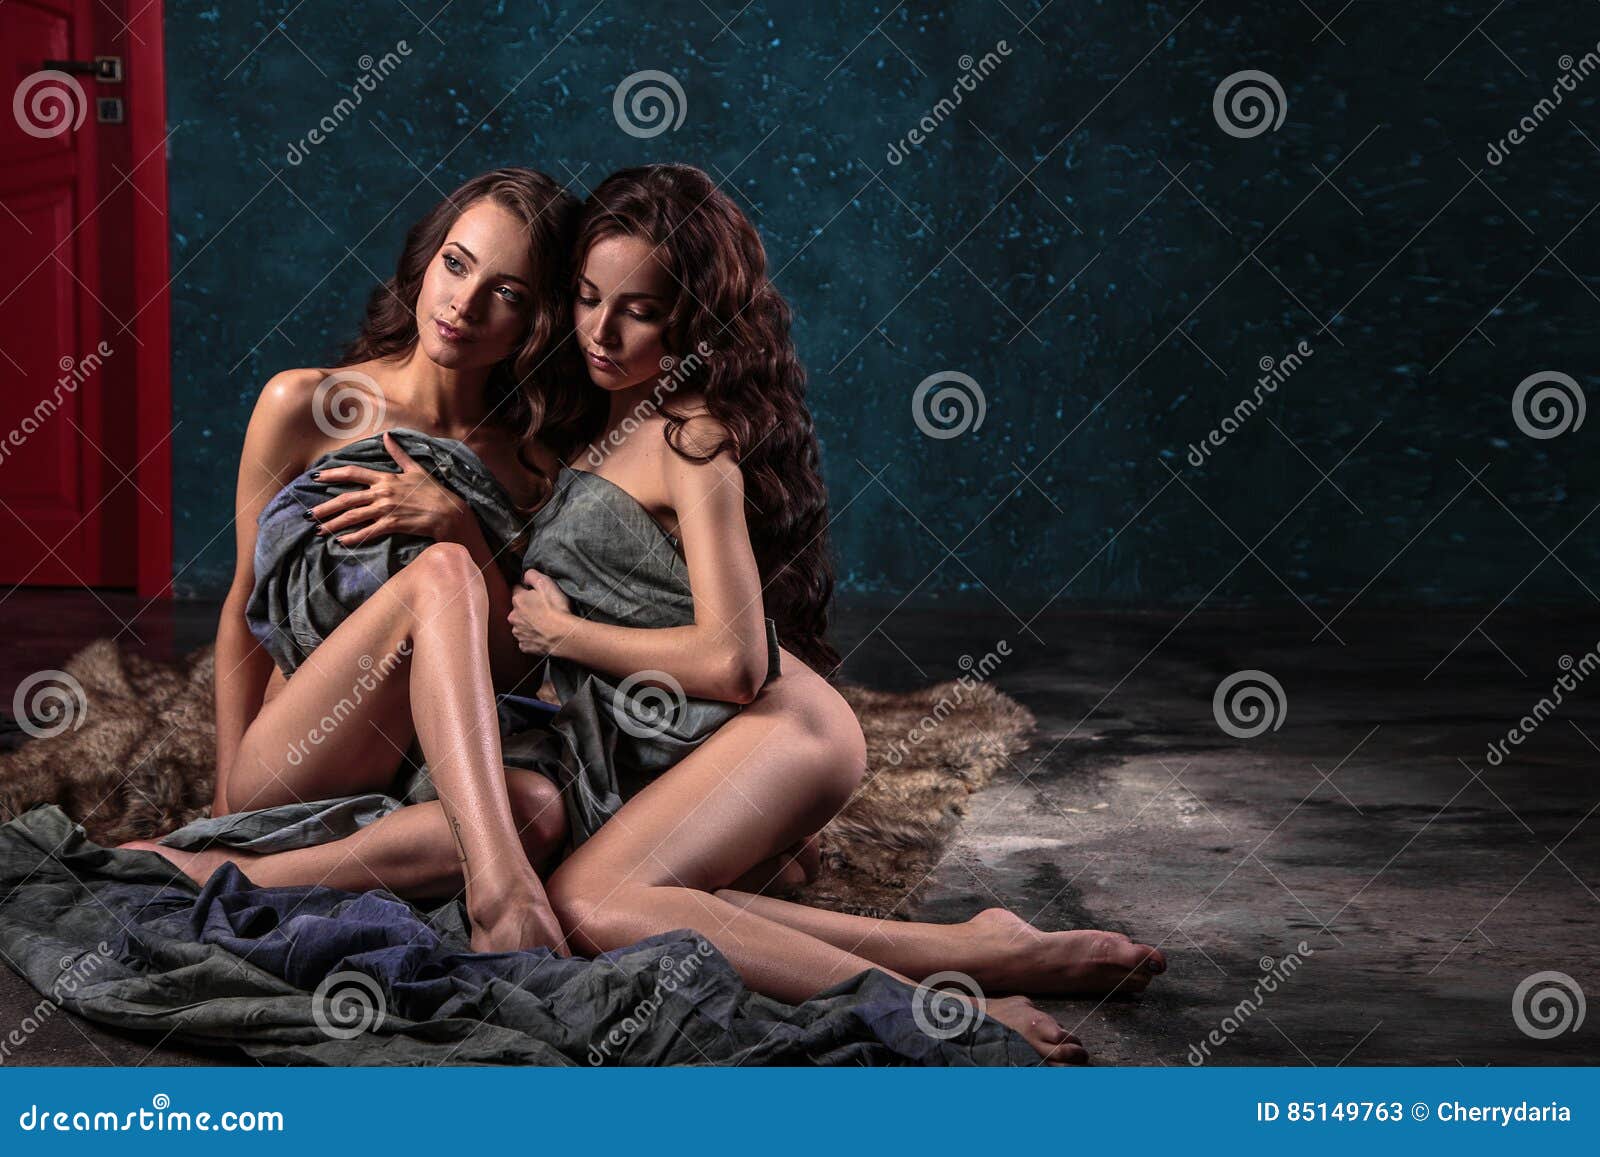 Beautiful Twins Young Women with Natural Make-up and Hair Style Posing Naked Covered with Grey Cloth Stock Image pic pic